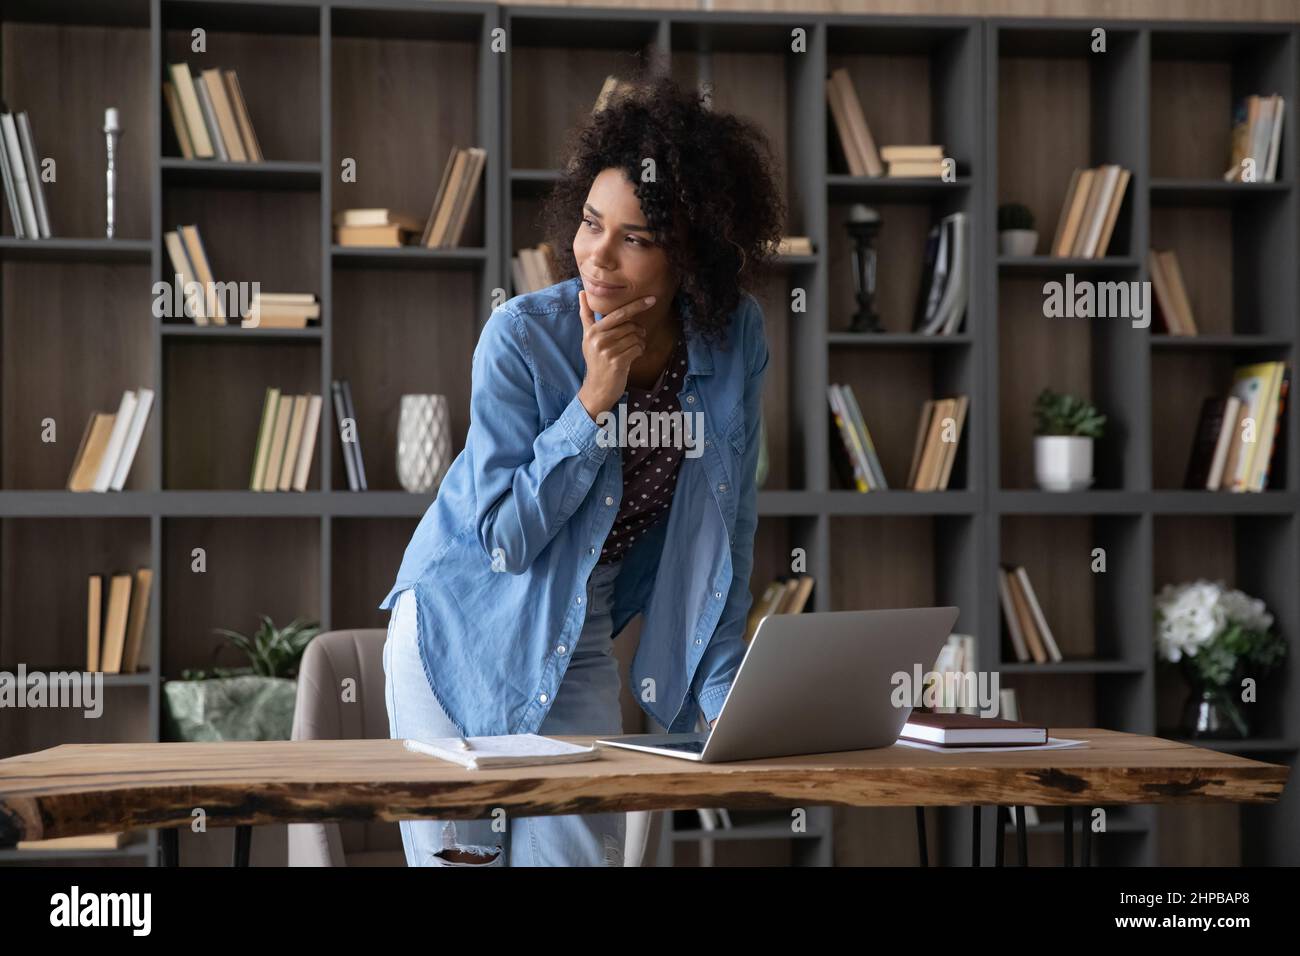 Thoughtful young African American businesswoman working on computer. Stock Photo